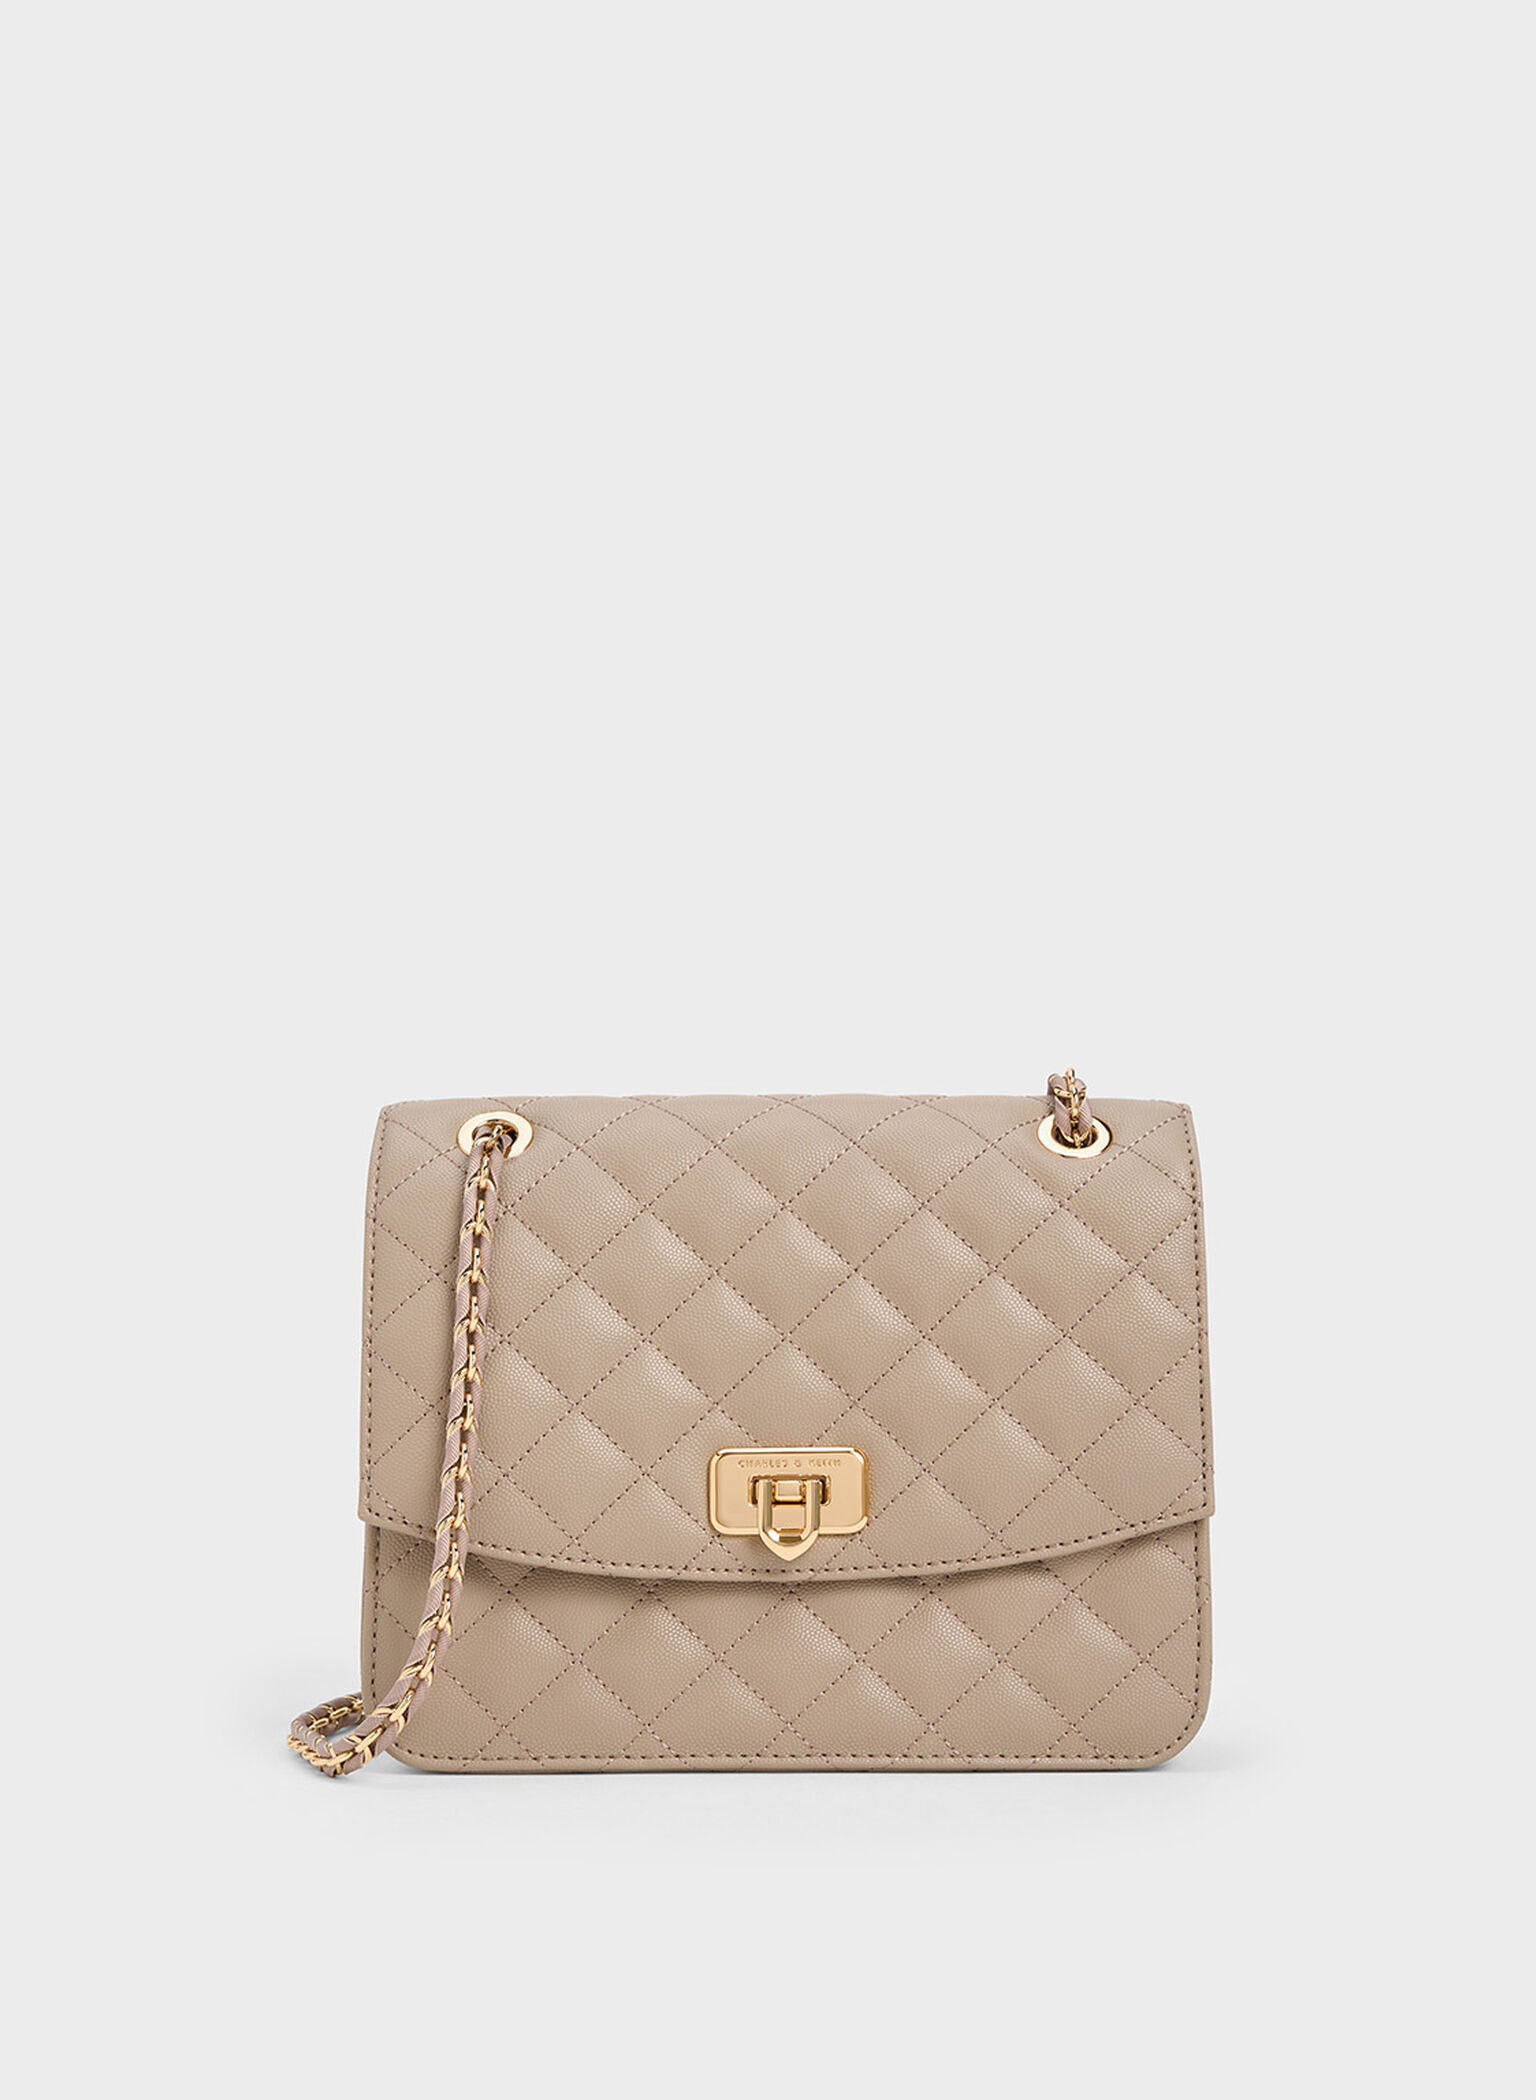 Charles & Keith - Women's Cressida Quilted Chain Strap Bag, Taupe, M